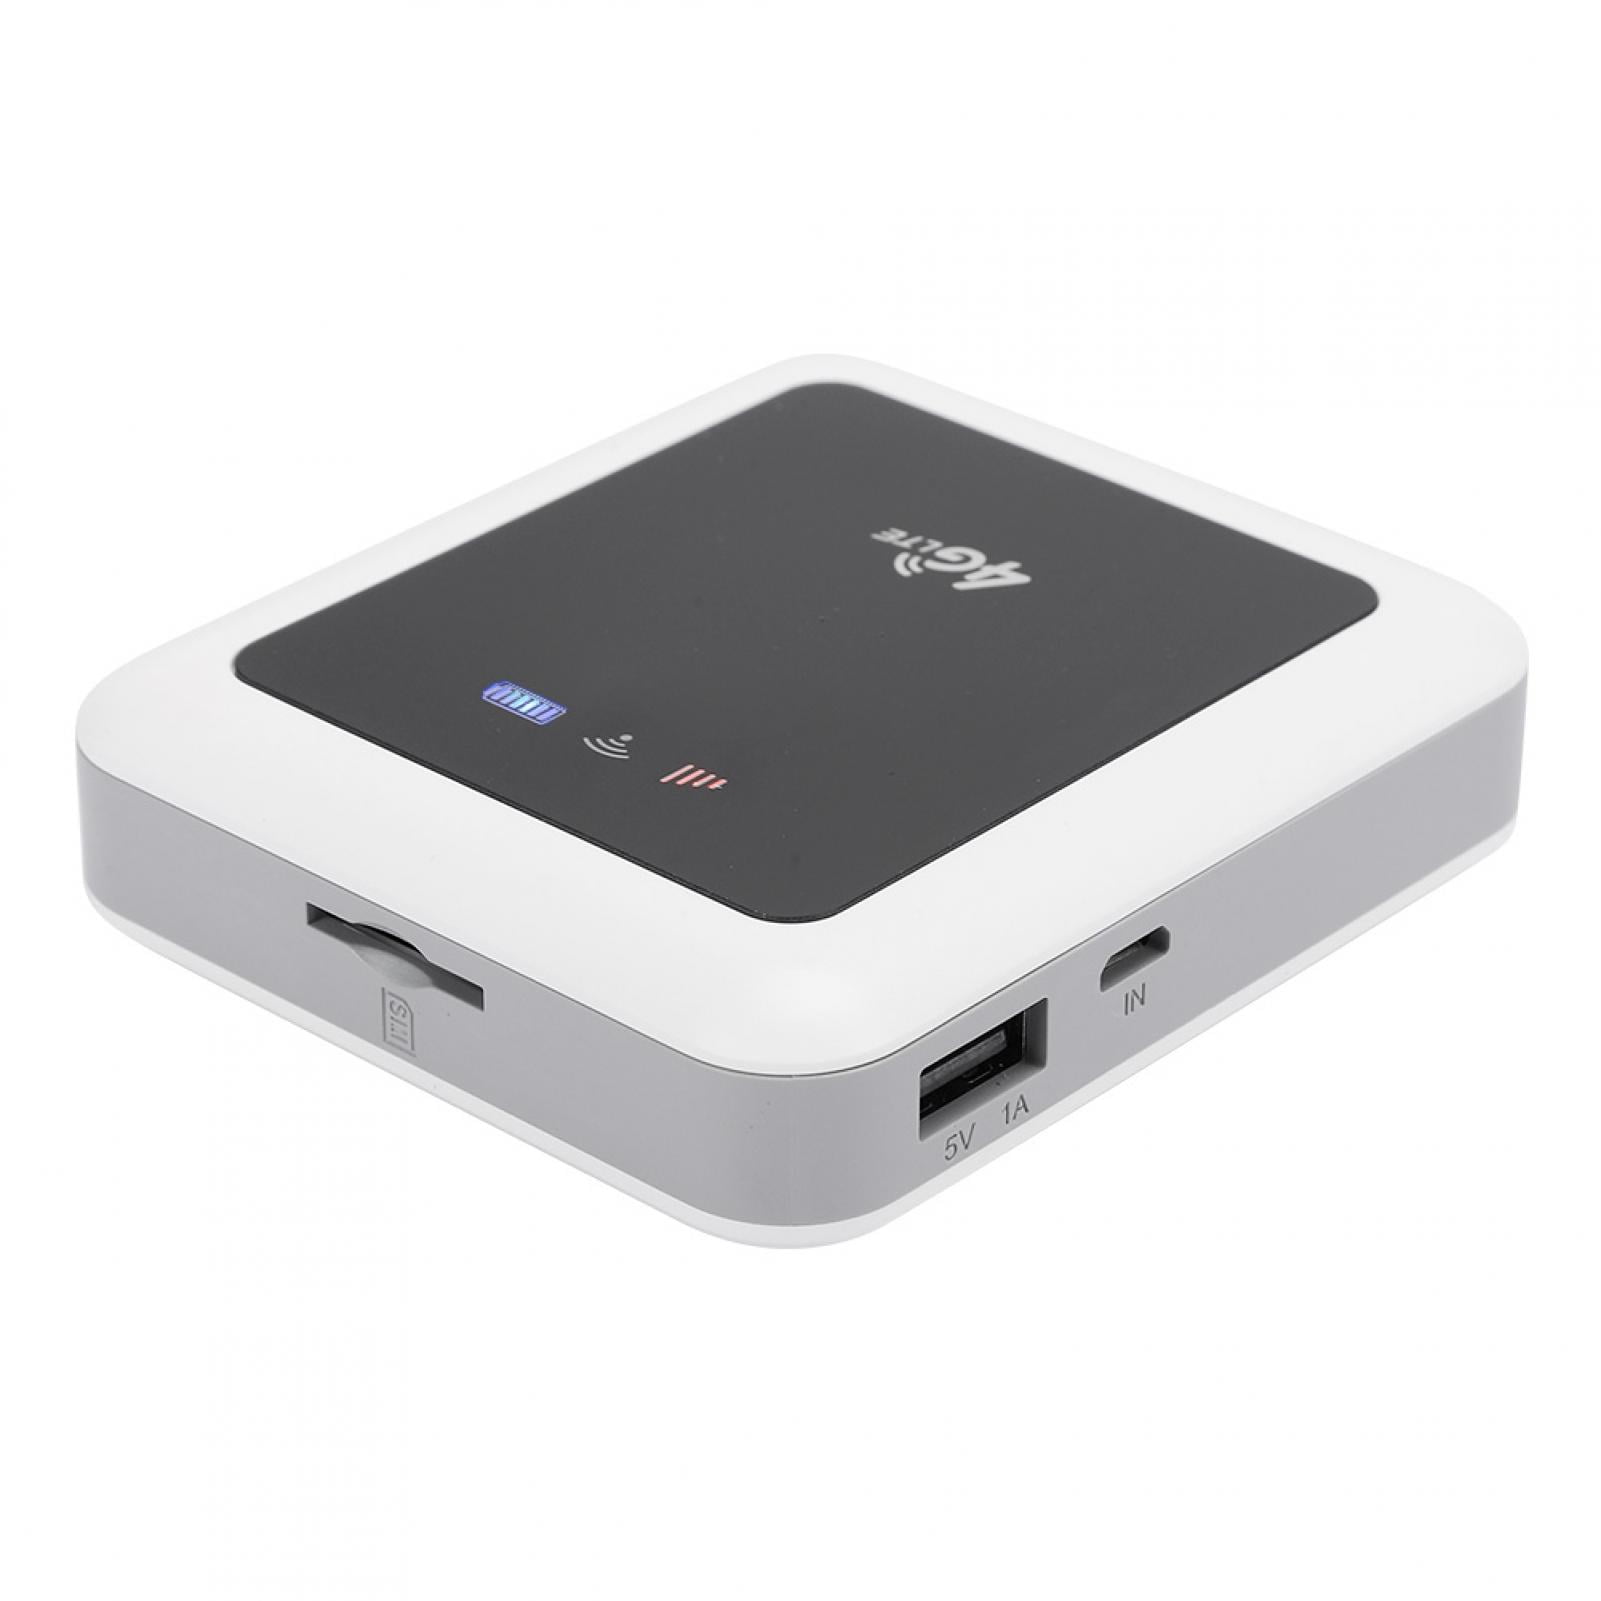 Wireless WiFi Router,Mini Portable Router,Universal Non-SIM-Card White International 4G/3G,Travel Router,for Tablet Phone Laptop Photo Backup/Data Transfer,5200mAh Battery 